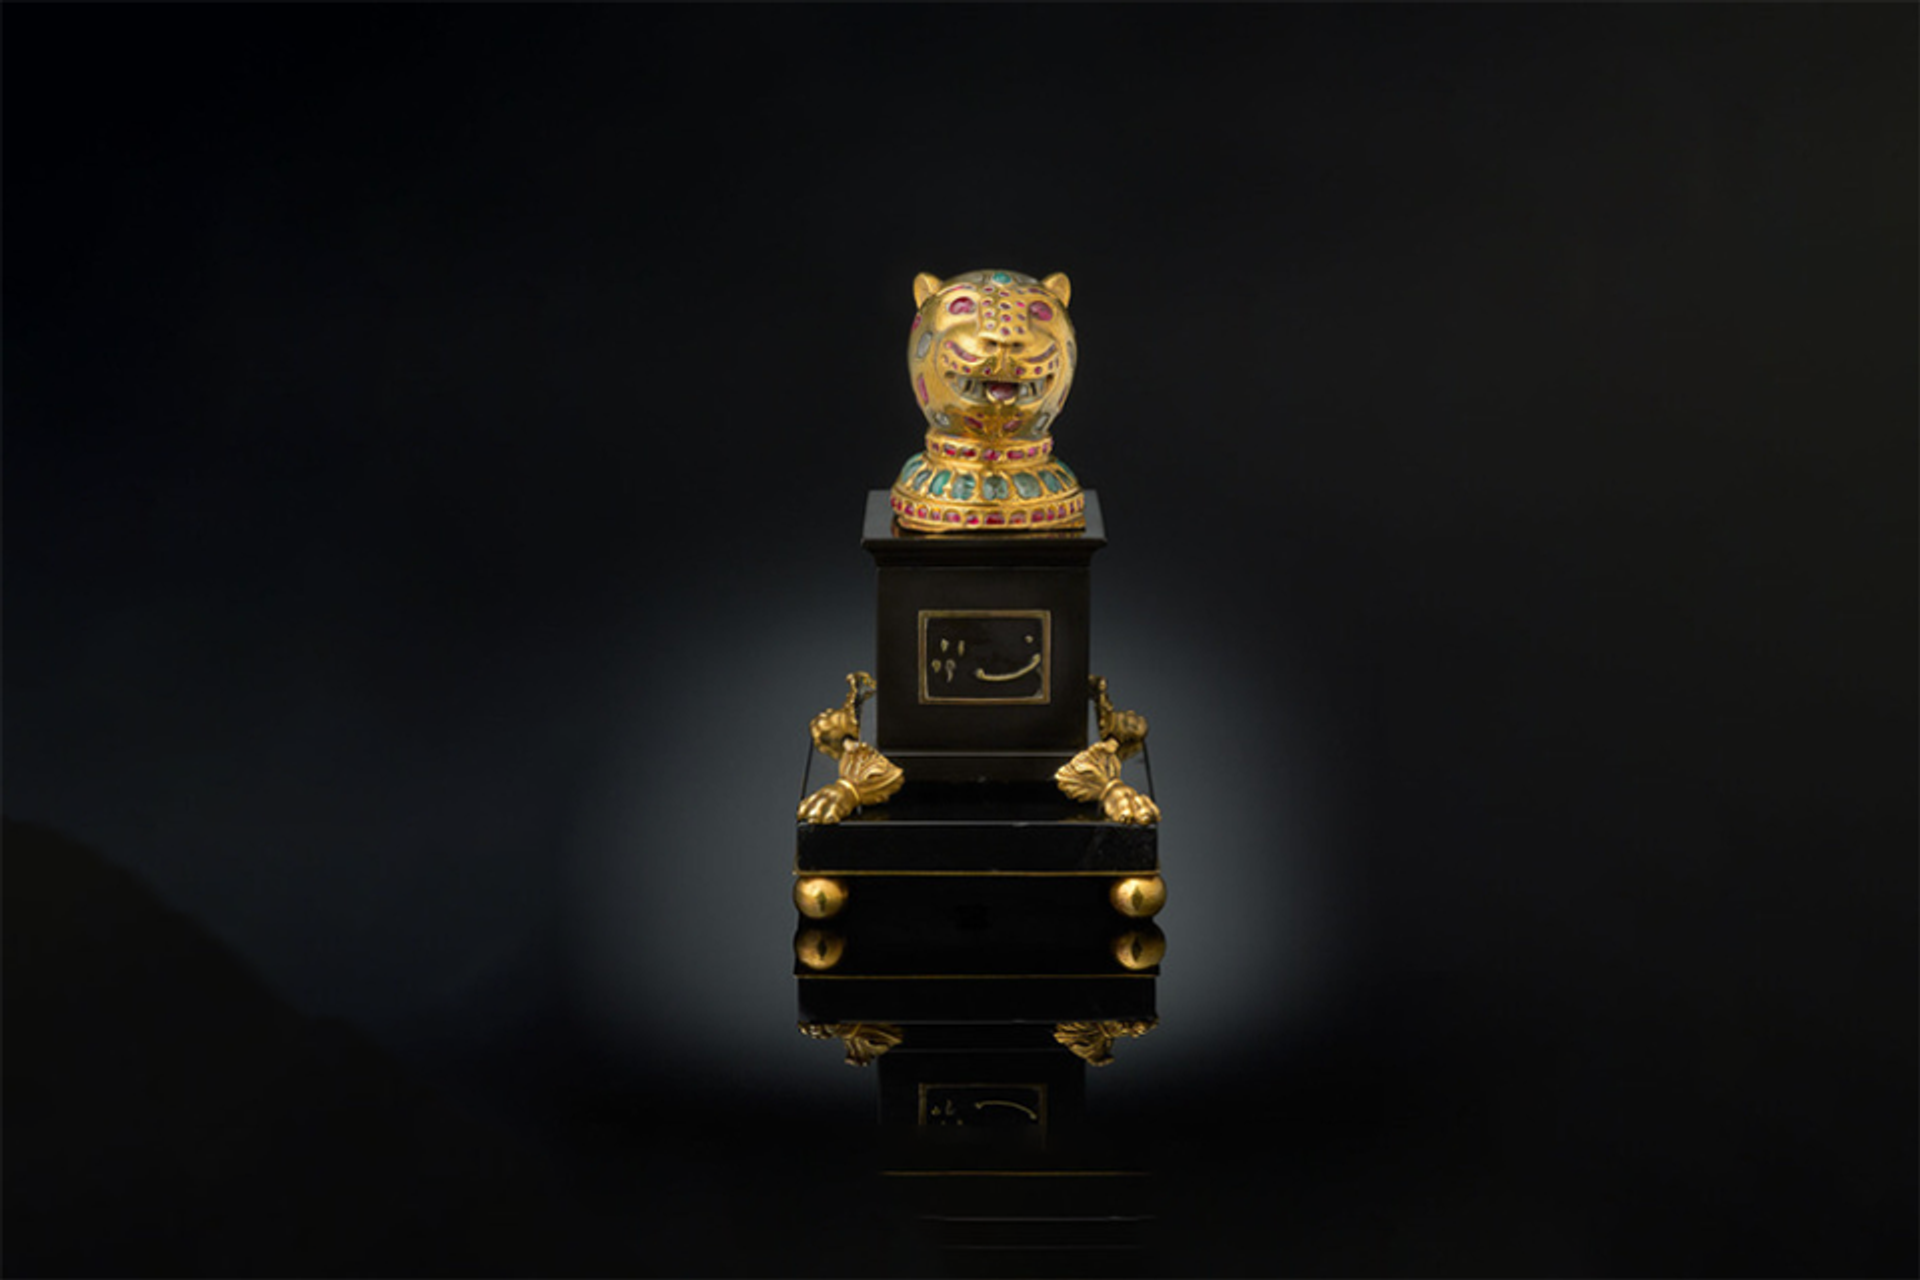 The jewel-encrusted gold tiger's head finial

Courtesy of DCMS